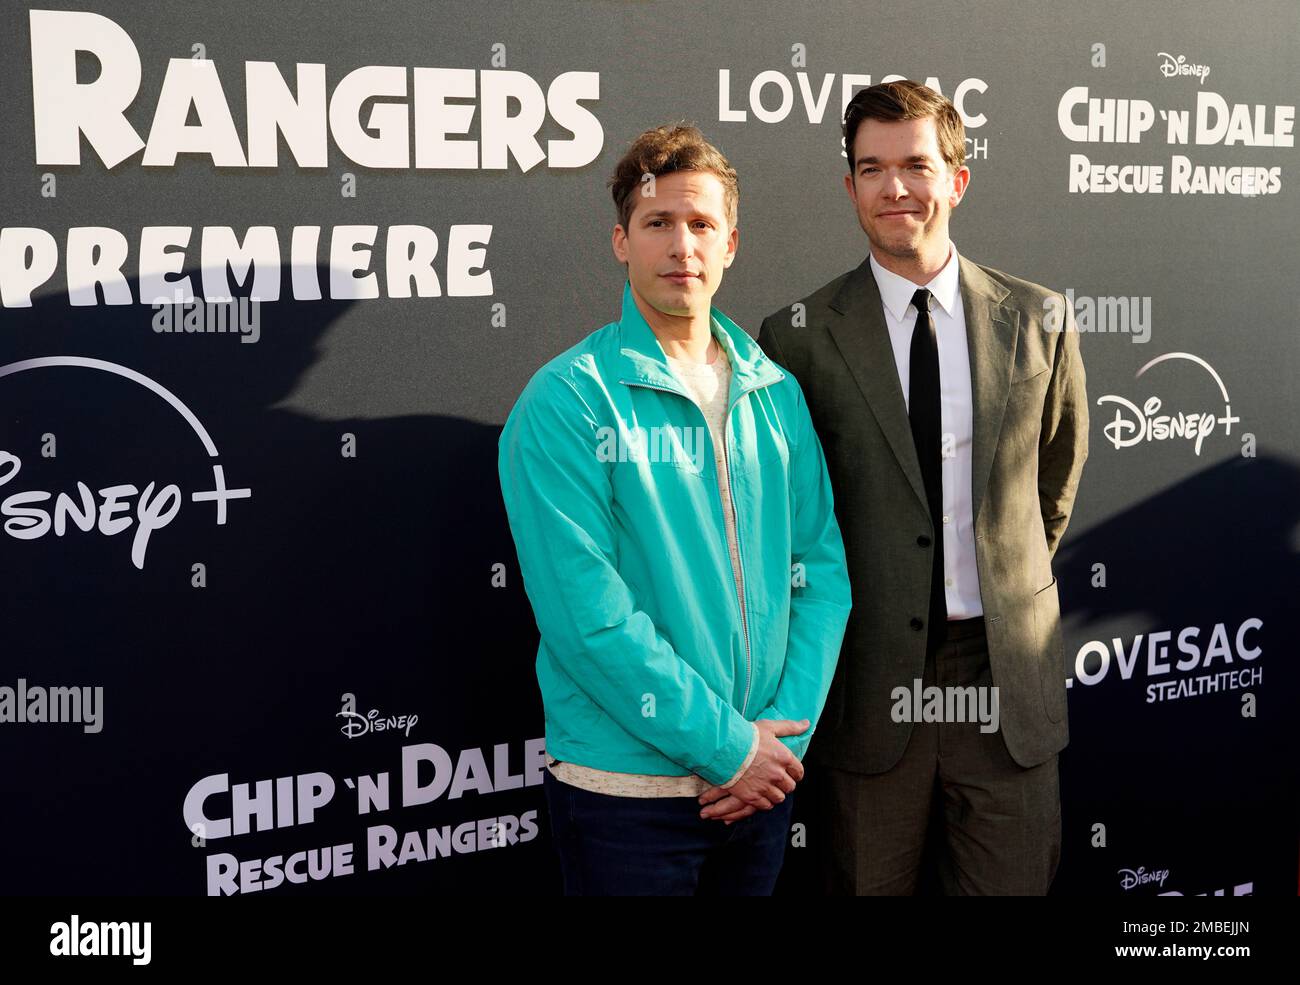 Andy Samberg, left, and John Mulaney, cast members in "Chip 'n Dale: Rescue  Rangers," pose together at the premiere of the film, Wednesday, May 18,  2022, at the El Capitan Theatre in